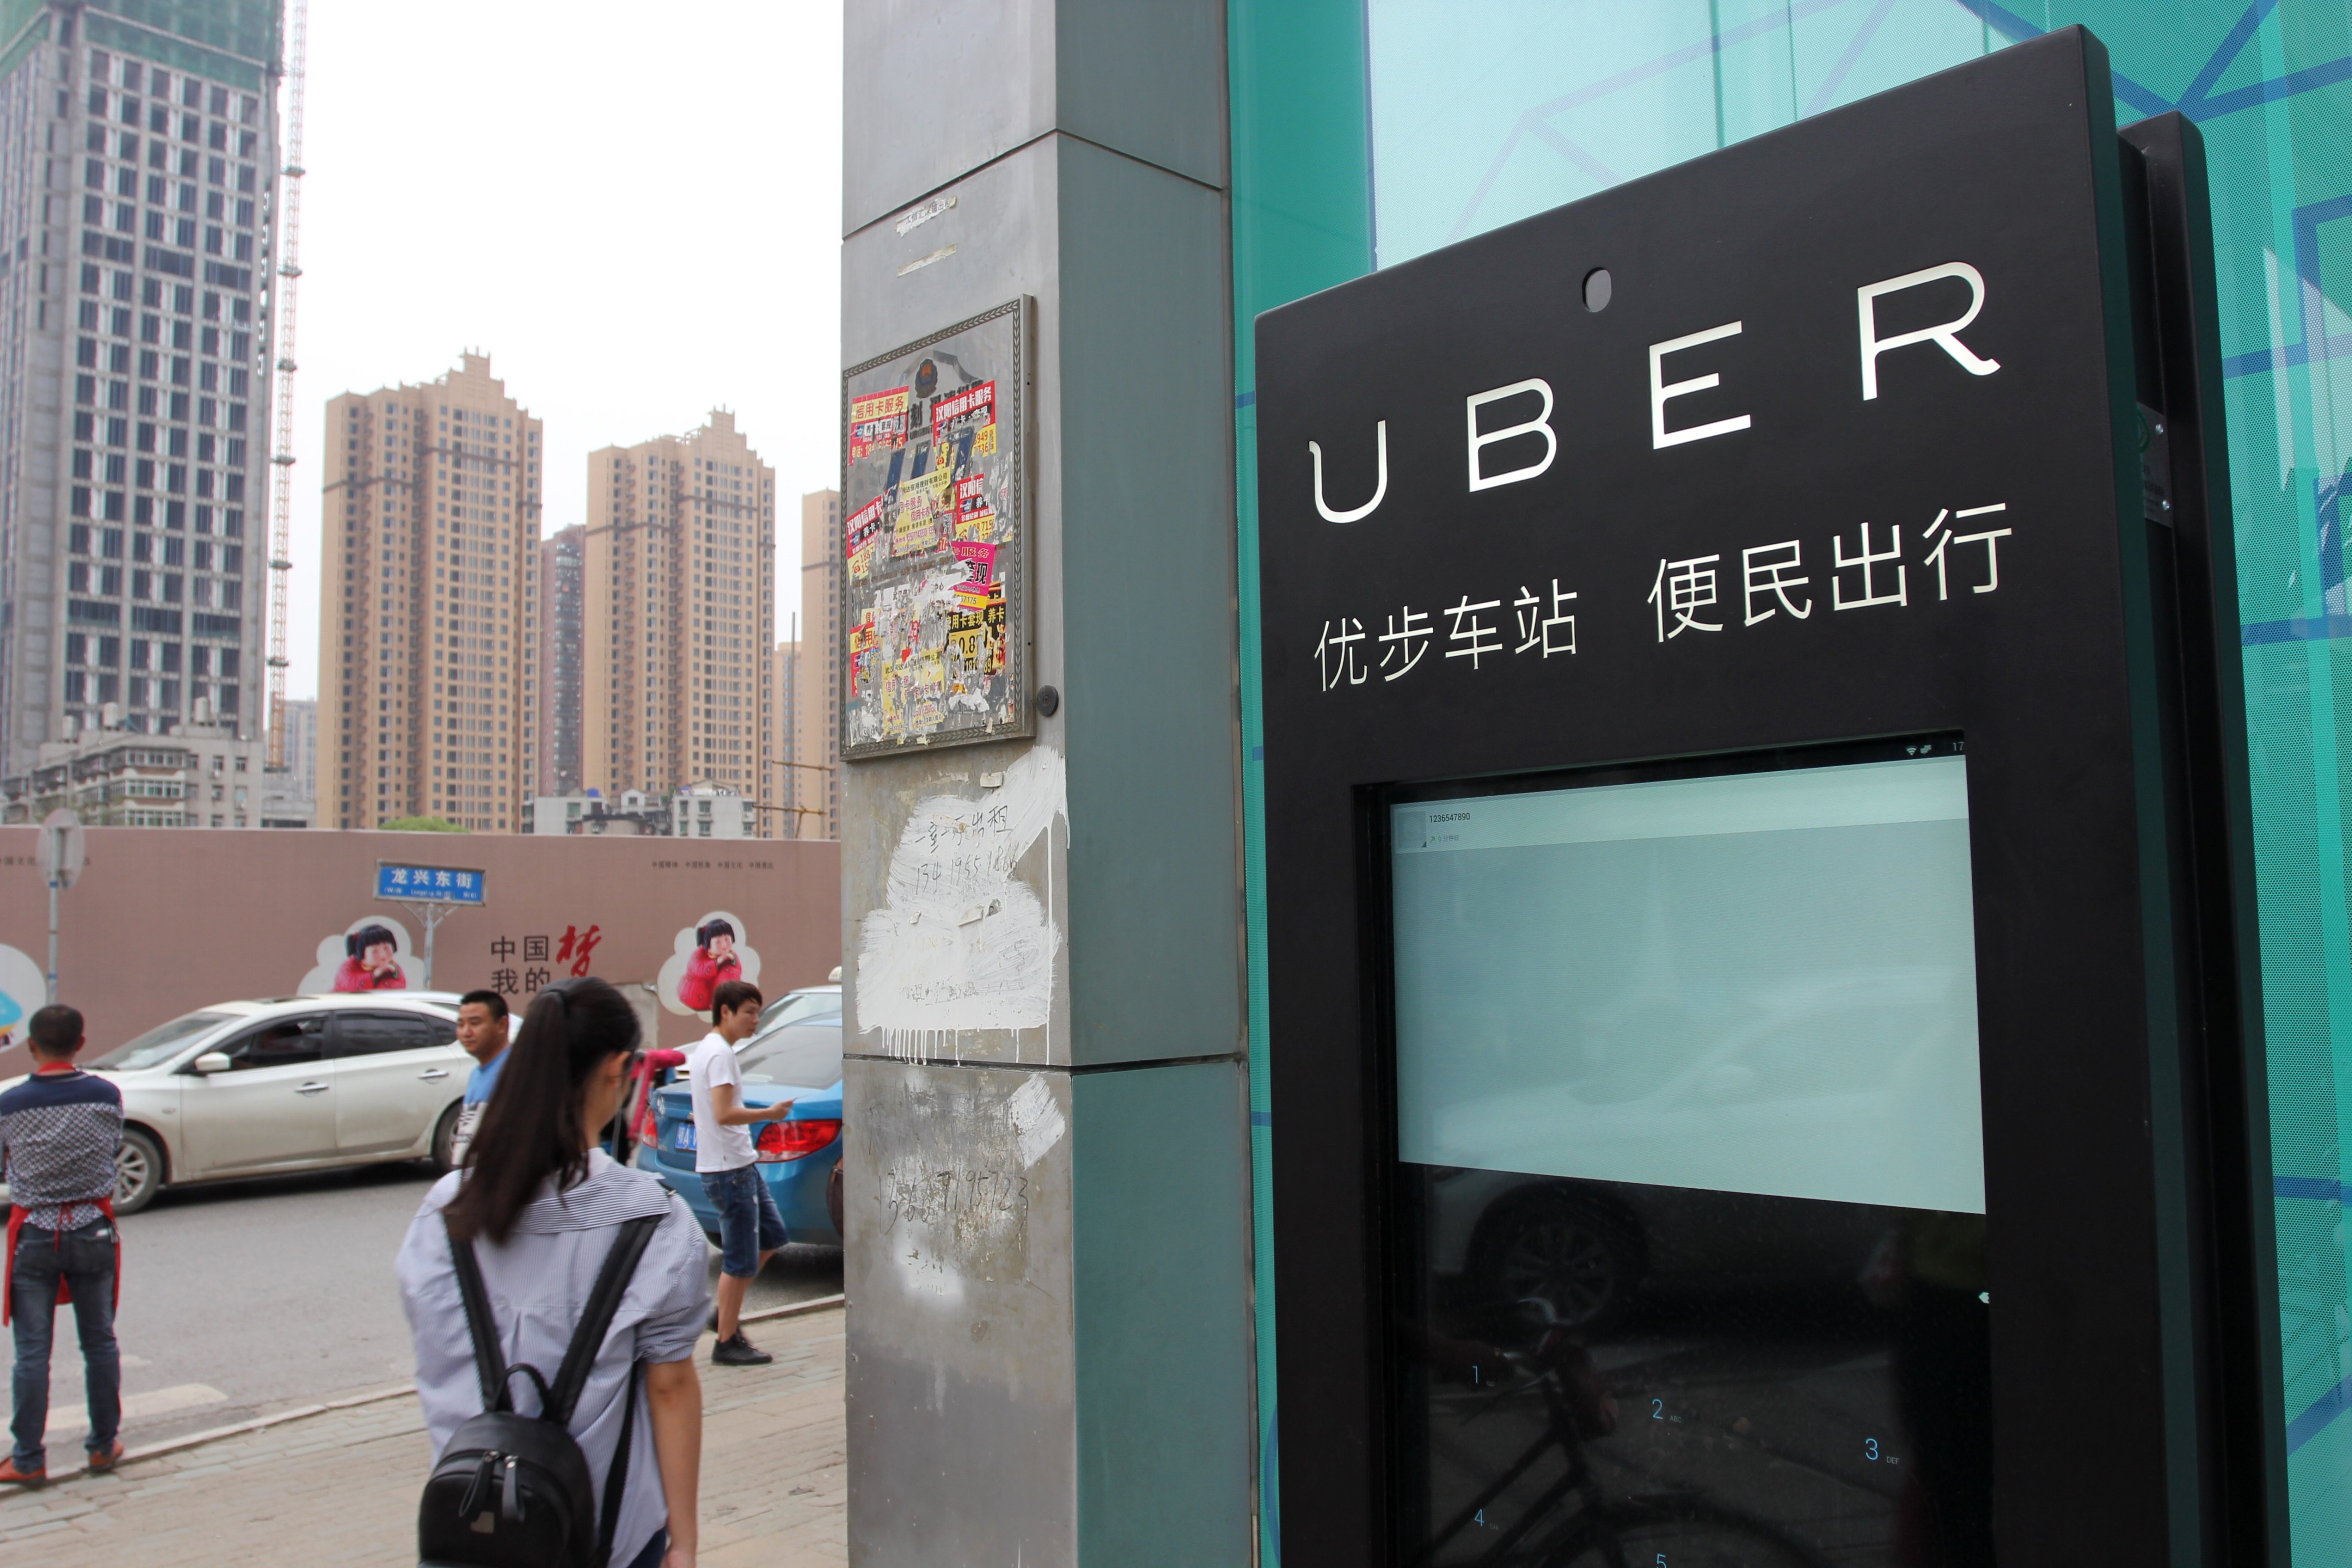 A pedestrian walks past a service station of Uber in Wuhan, China, April 14, 2016 (Sun xinming—Imaginechina/Getty Images)